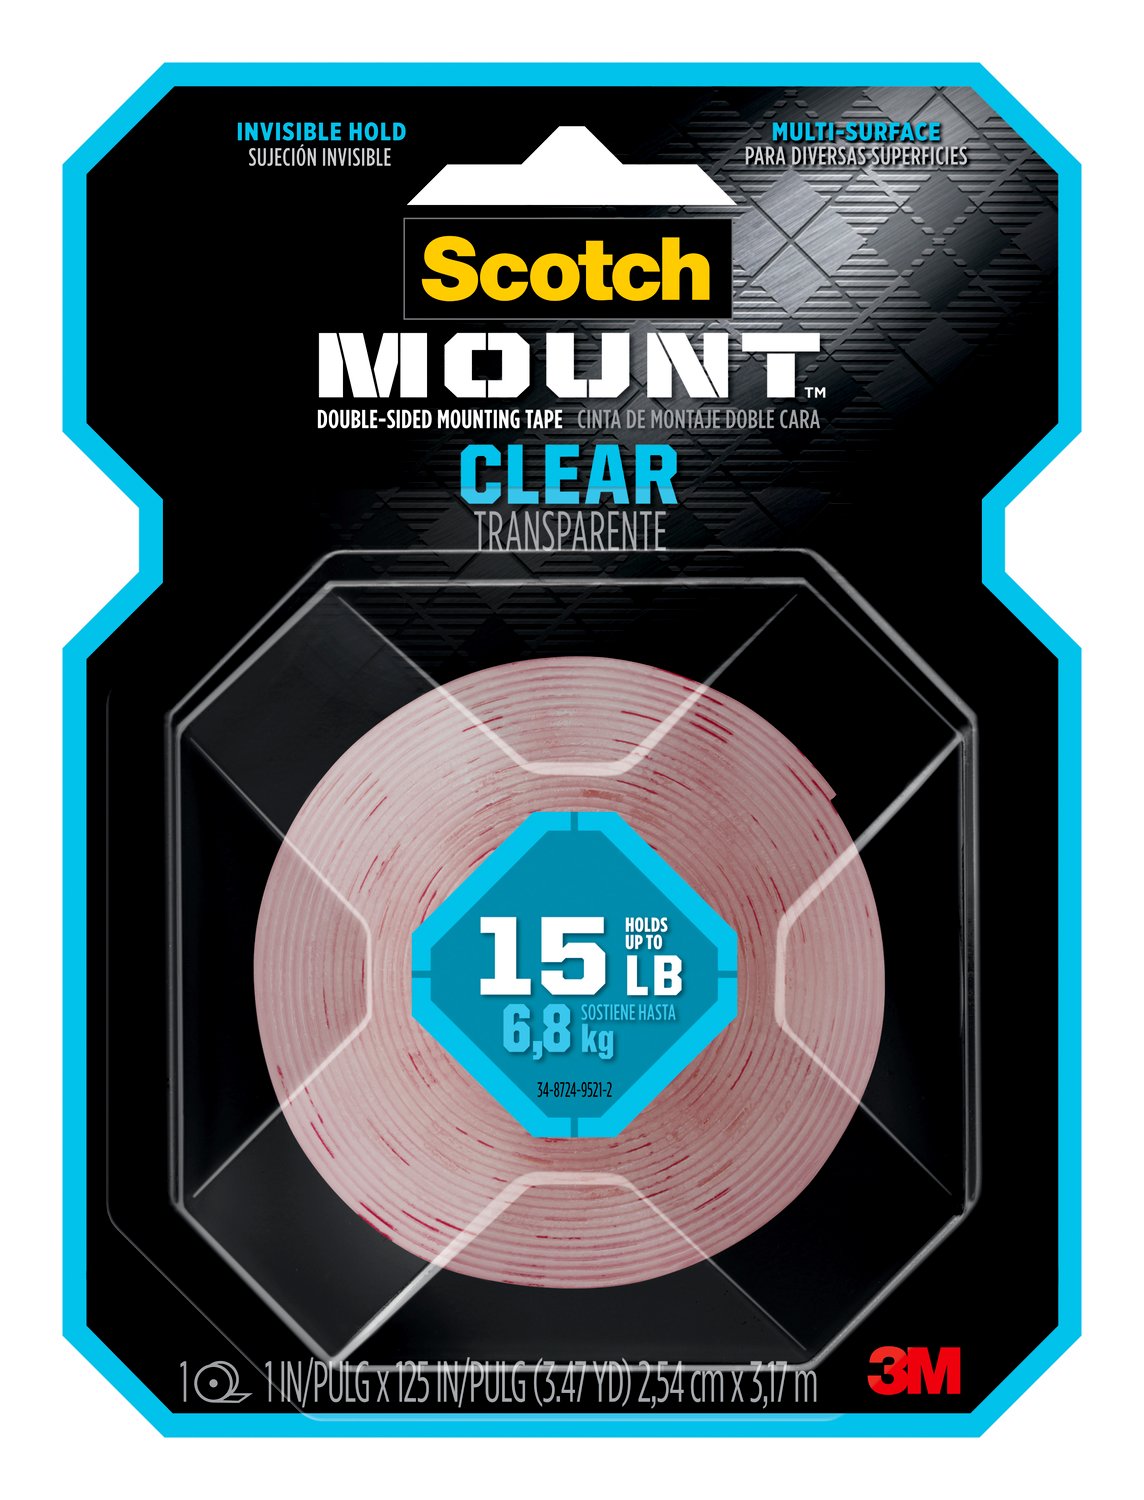 7100235334 - Scotch-Mount Clear Double-Sided Mounting Tape 410H-MED, 1 in x 125 in (2.54 cm x 3.17 m)